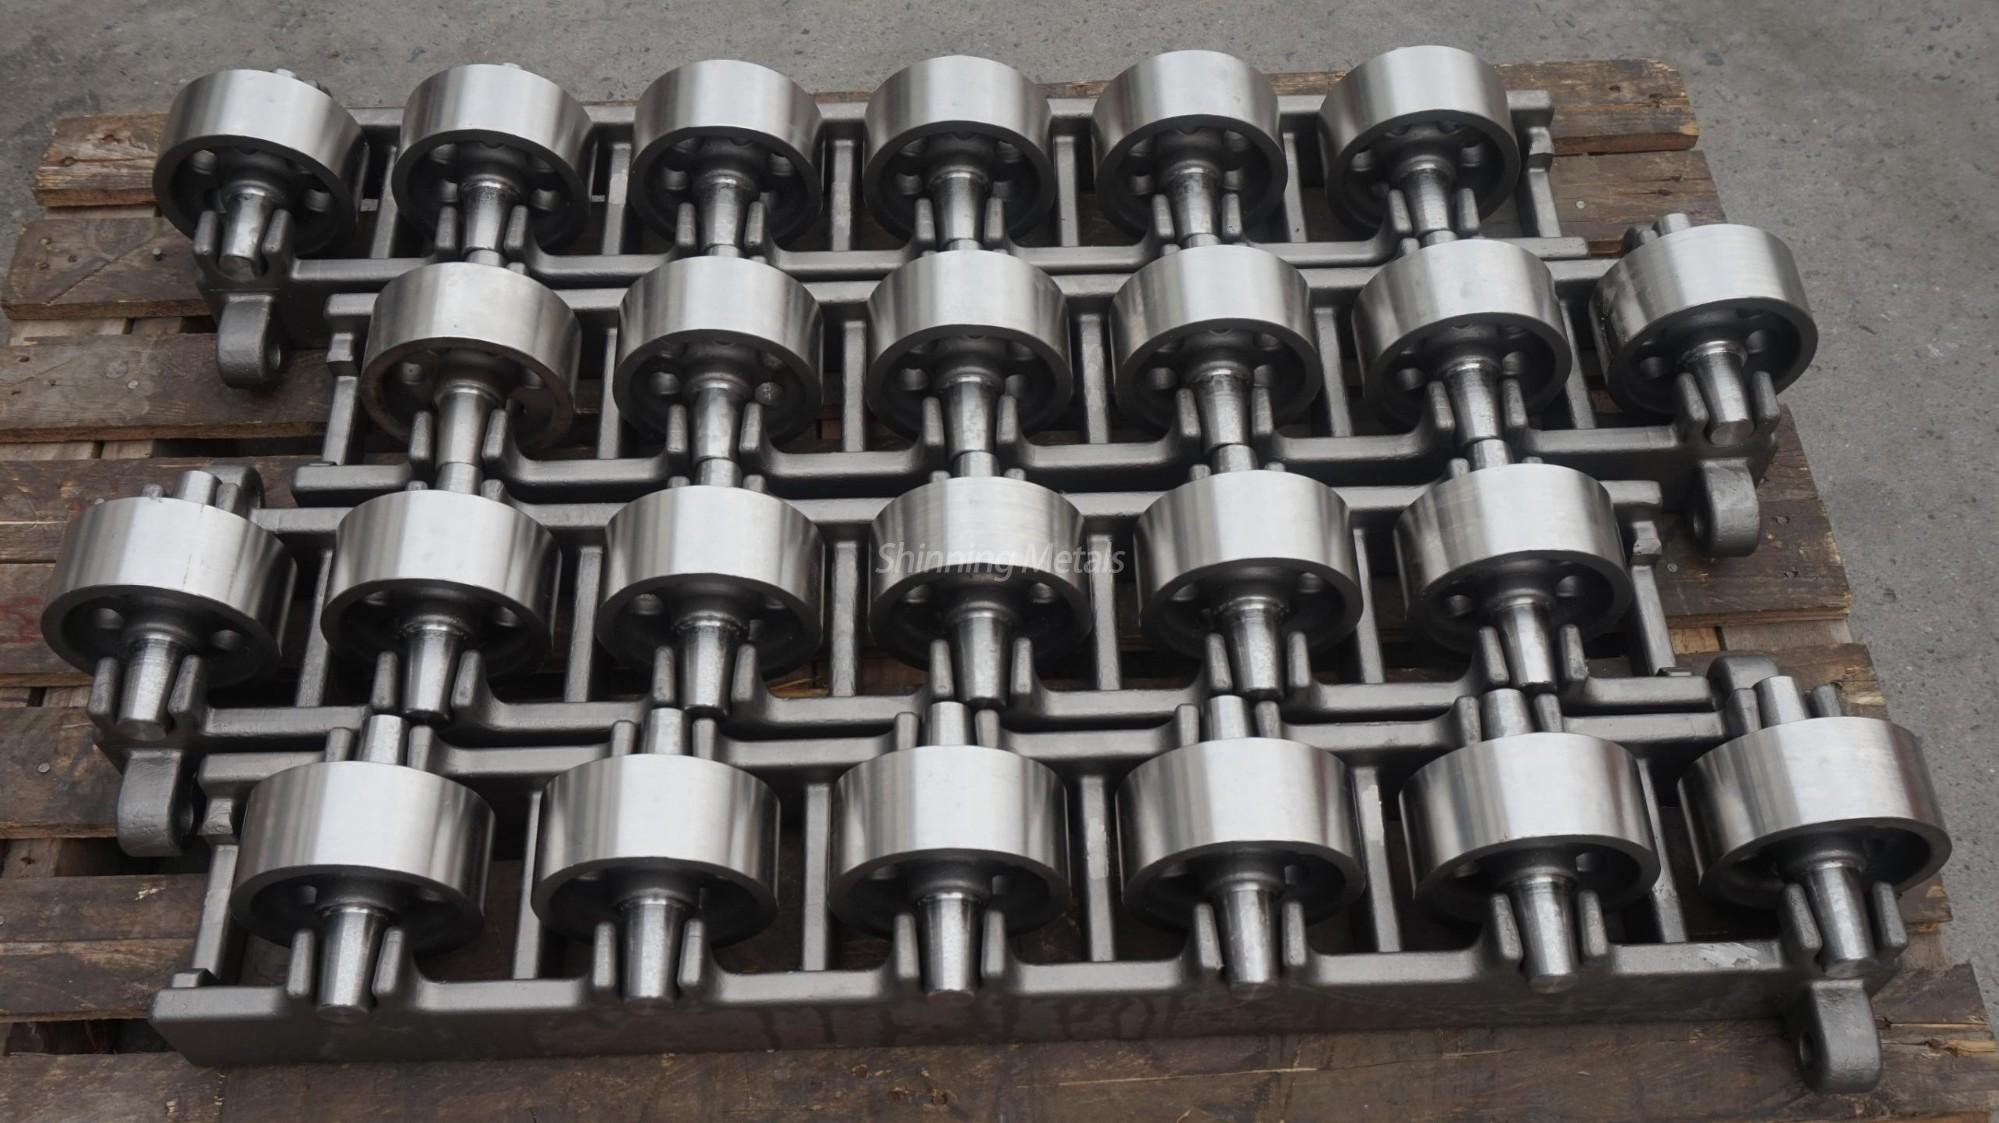 Furnace Rollers